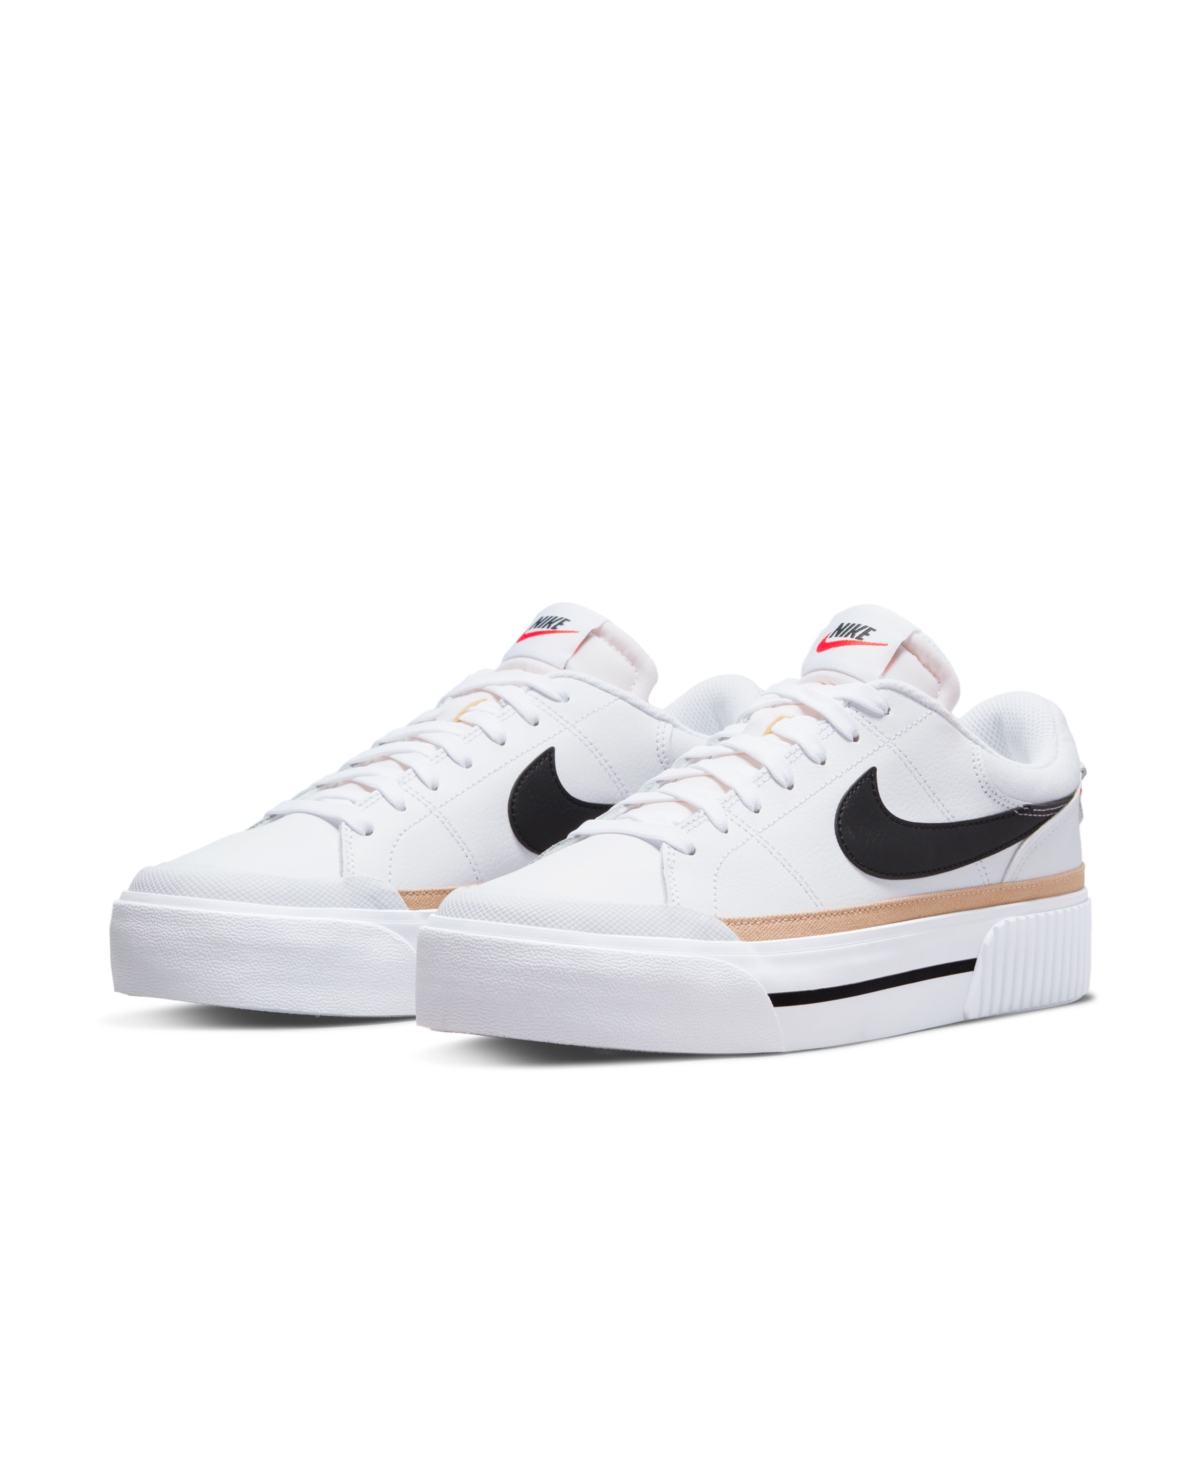 Shop Now For The Nike Women's Court Legacy Lift Platform Casual Sneakers from Finish Line 